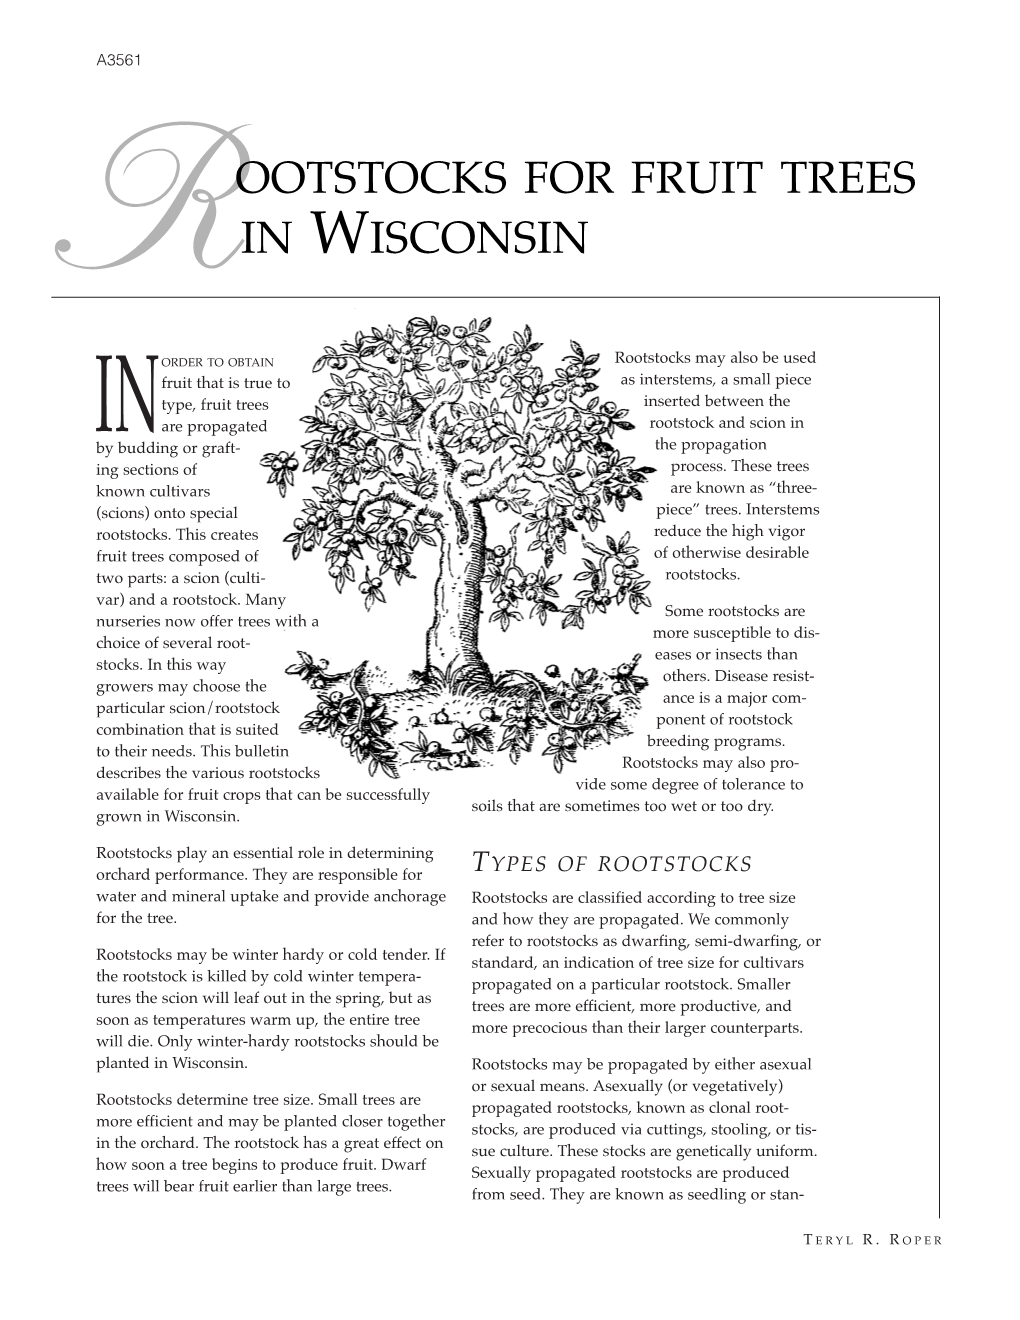 Rootstocks for Fruit Trees in Wisconsin R-11-01